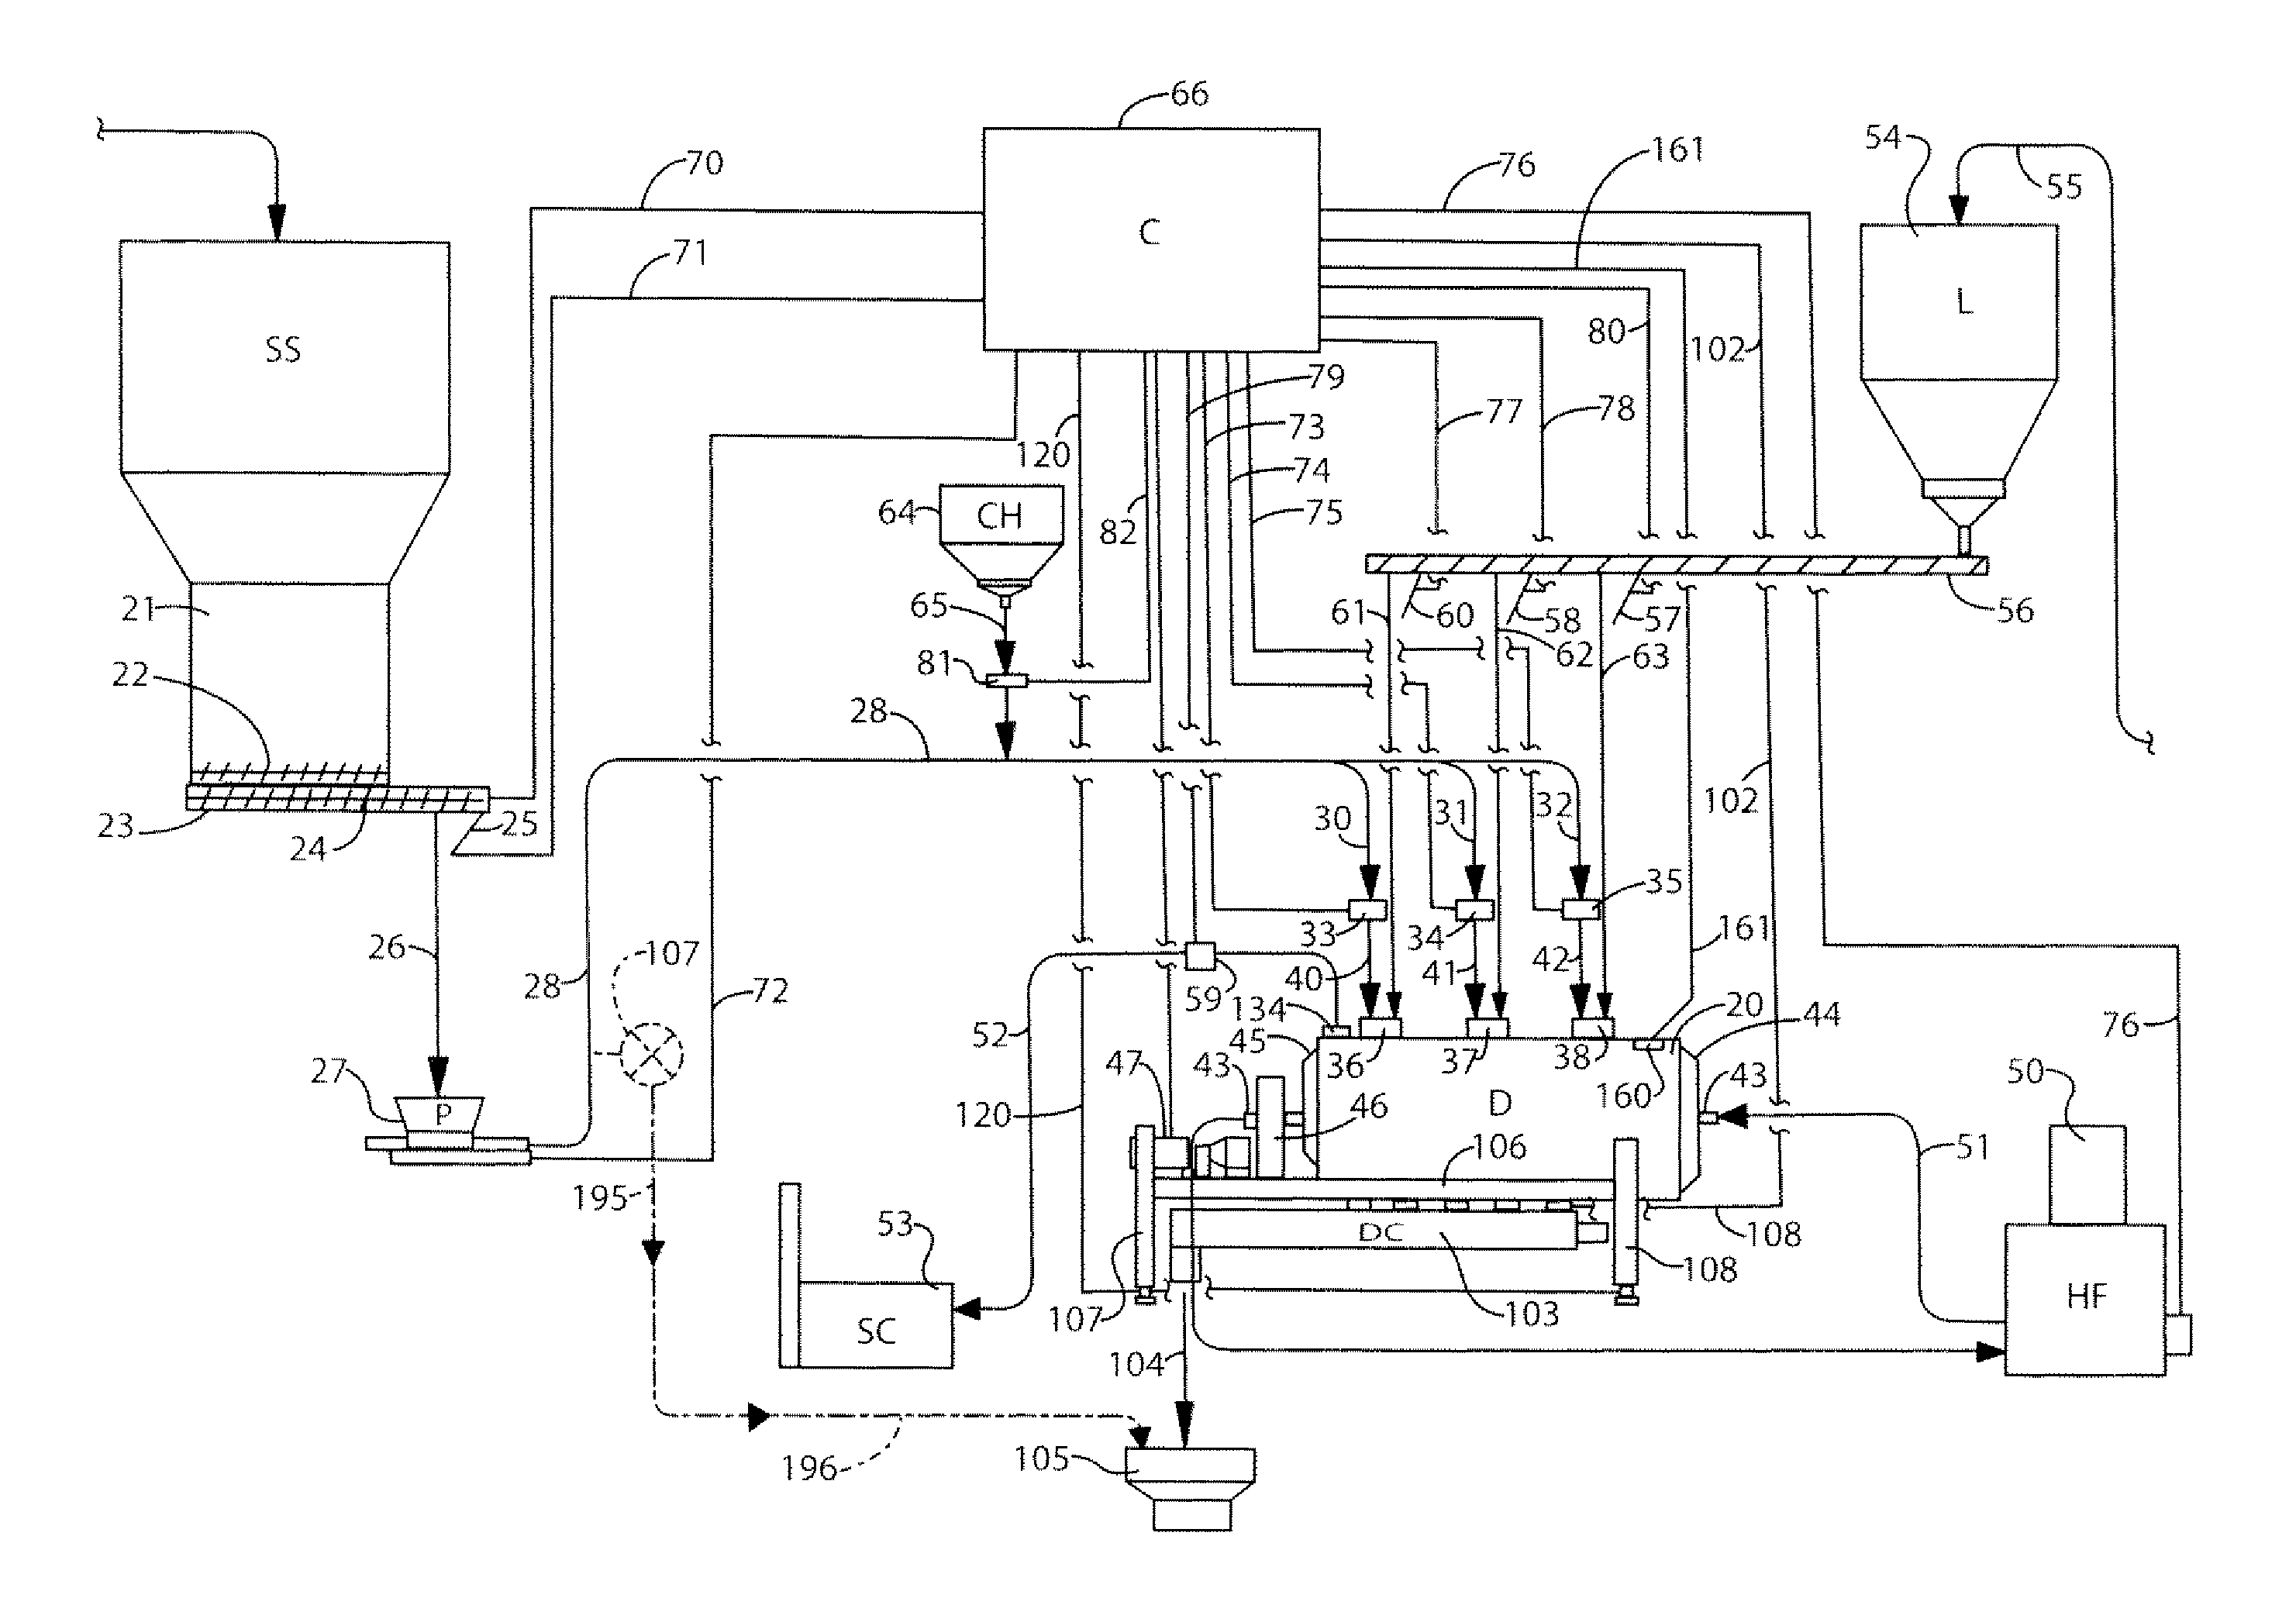 Apparatus, method and system for treating sewage sludge